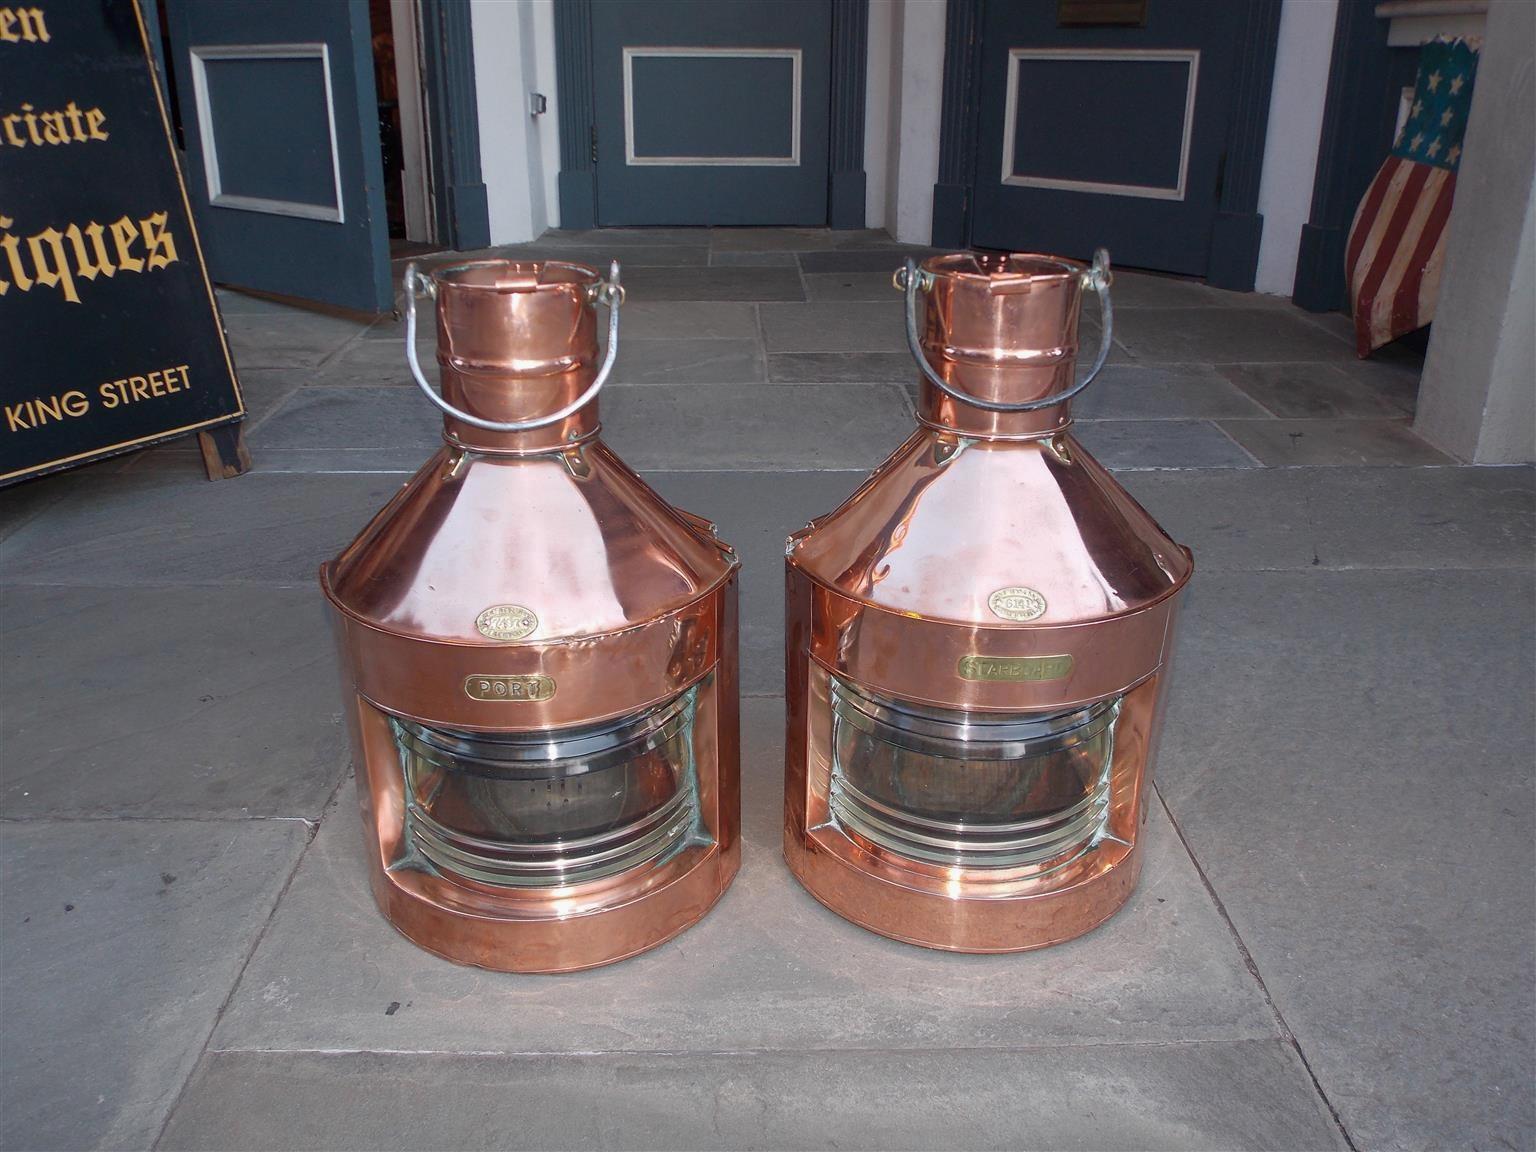 Pair of English nautical copper and brass port and starboard ship lanterns with polished steel carrying handles, vented tops, original Fresnel lenses, brass stamped badges, rear handles with sliding doors, and original mounting brackets. Stamped